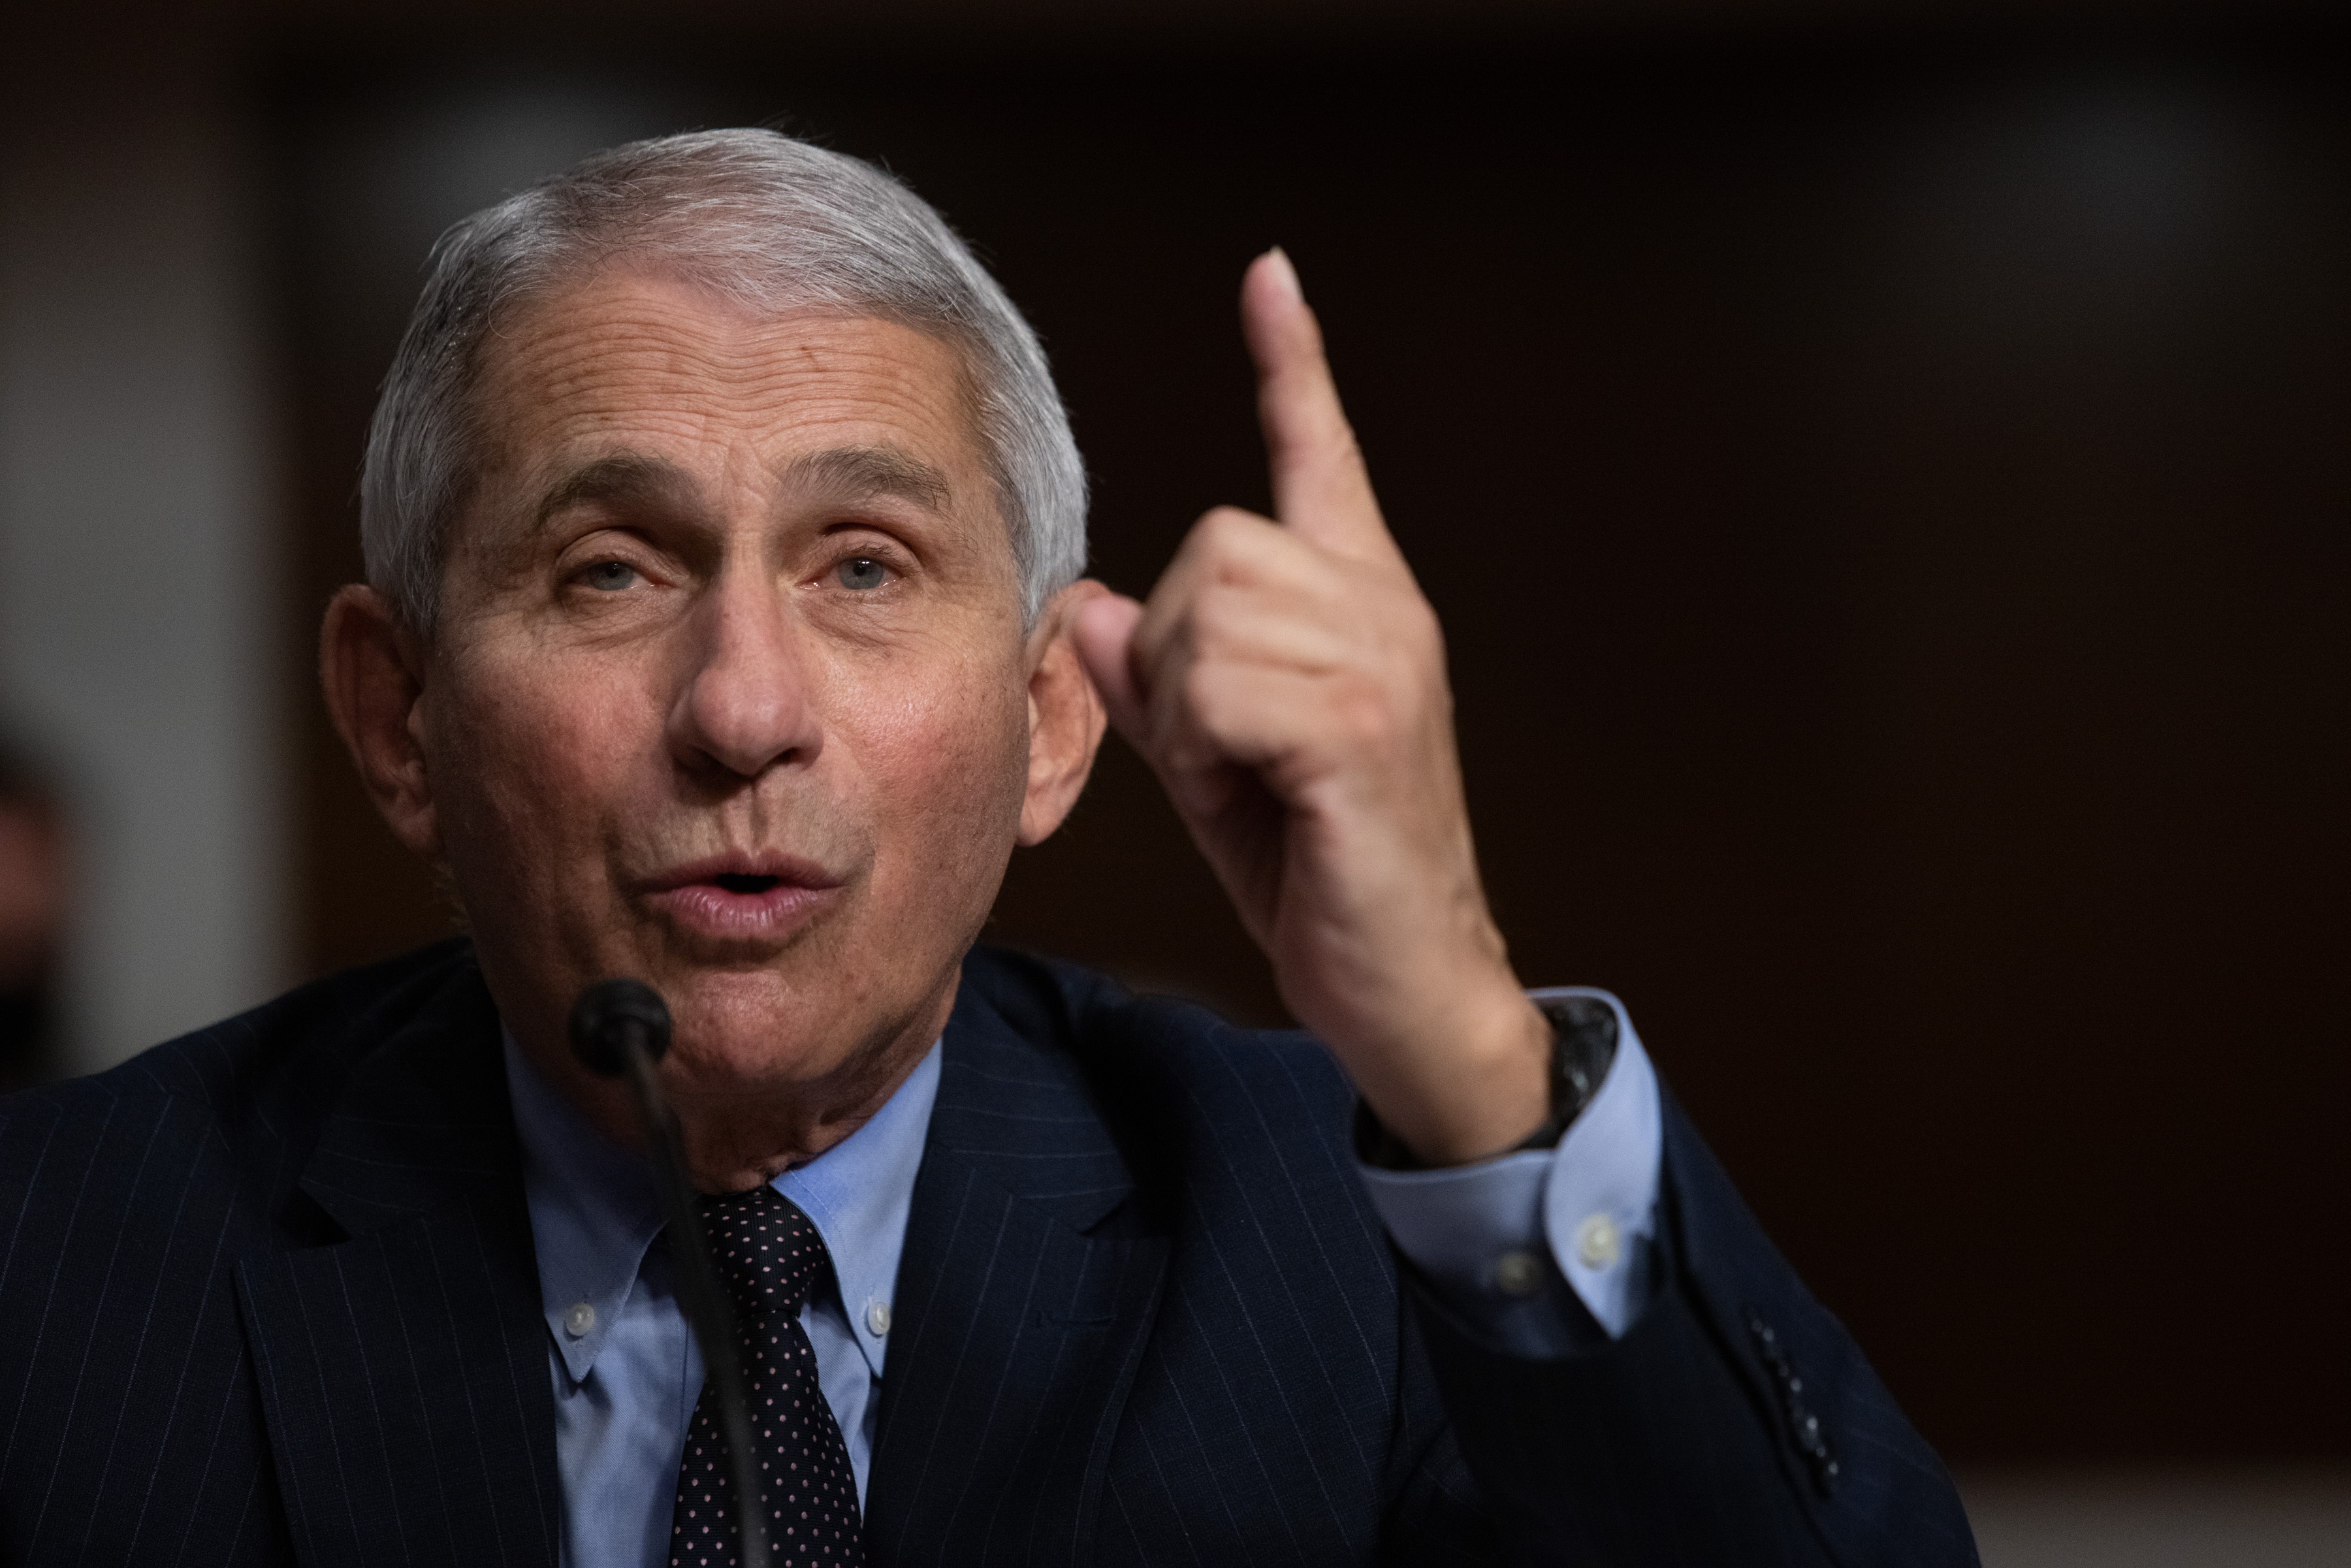 Fauci Cautions Against Herd Immunity Through Widespread Infection - Newsweek